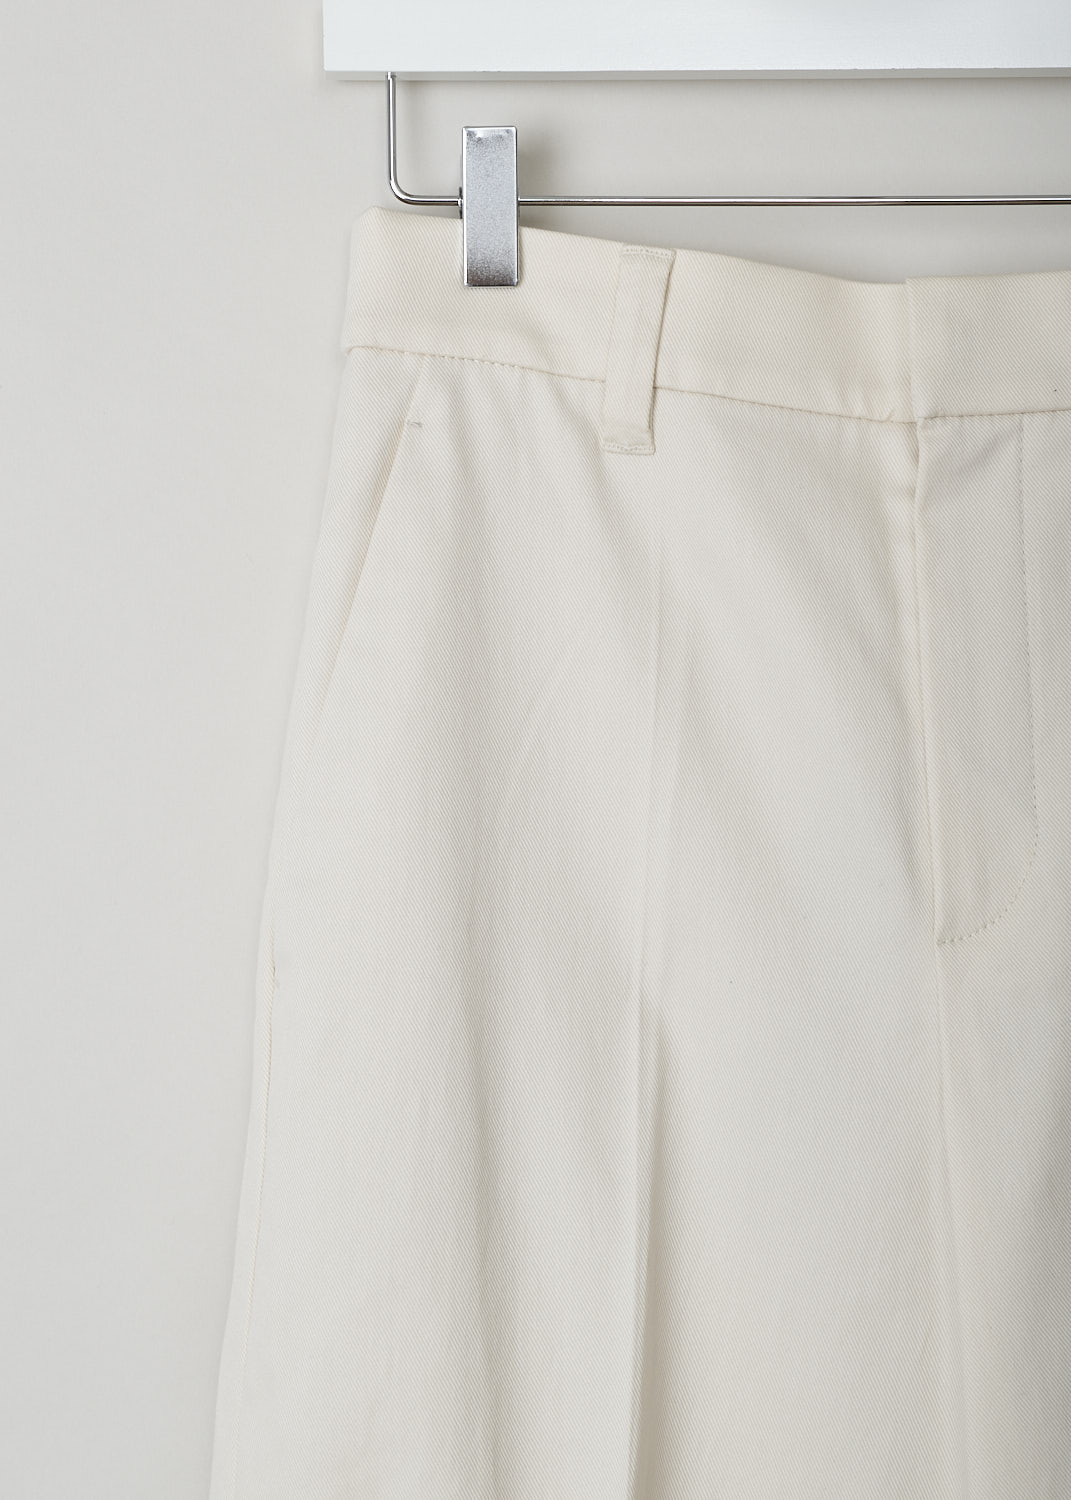 BRUNELLO CUCINELLI, BEIGE WIDE-LEG PANTS, MA130P7008_C7365, Beige, White, Detail, These beige pants have straight wider pant legs with a folded hem. The pant legs have pressed centre creases. The waistline has belt loops and is elasticated in the back. The closure option is a concealed hook and zipper. The pants have forward slanted pockets in the front and welt pockets in the back. 


